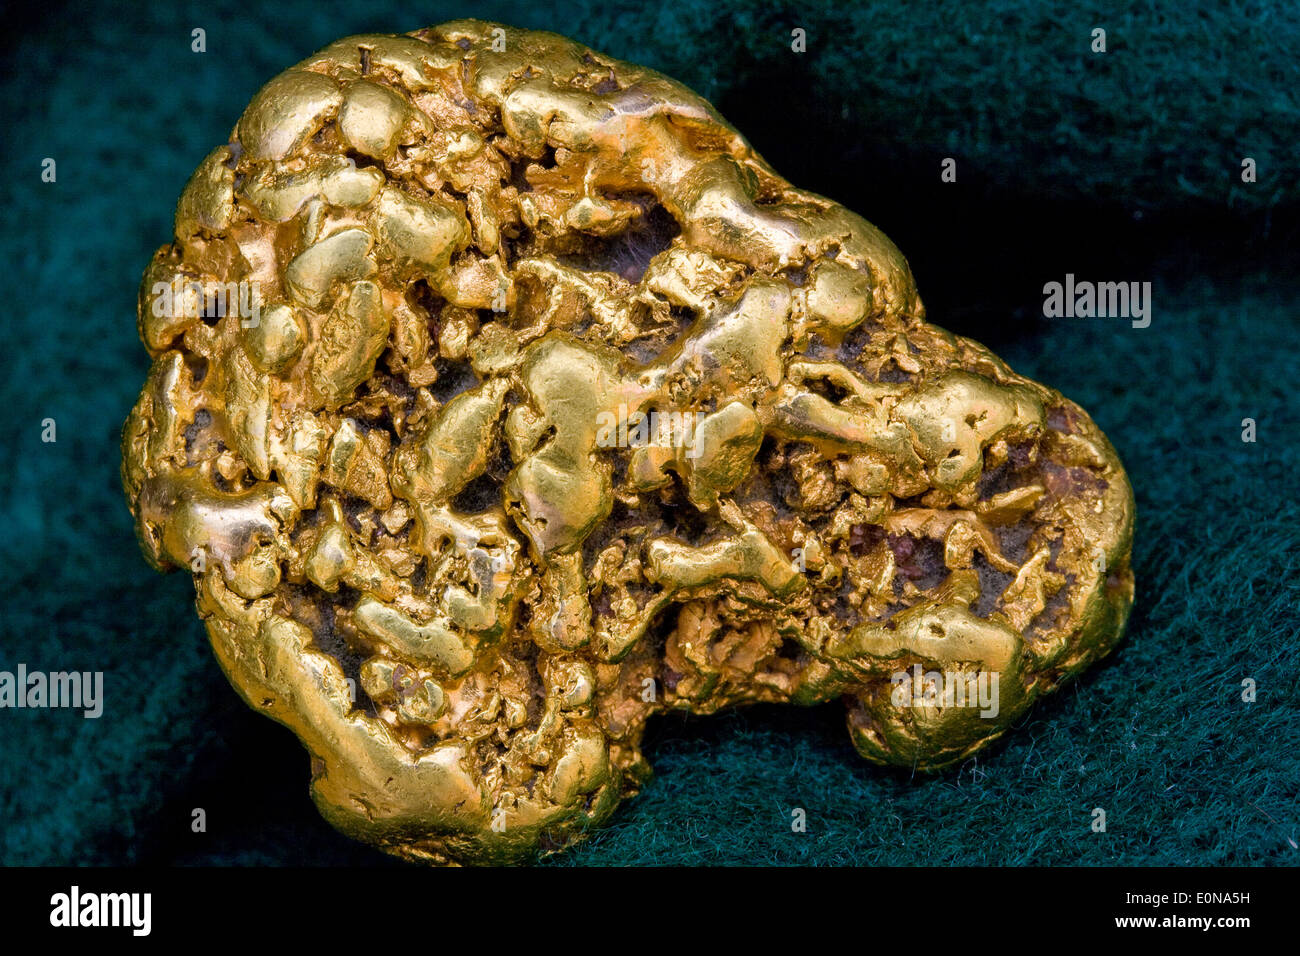 One Troy Ounce California (USA) Placer Gold Nugget - Natural Gold Specimen Stock Photo